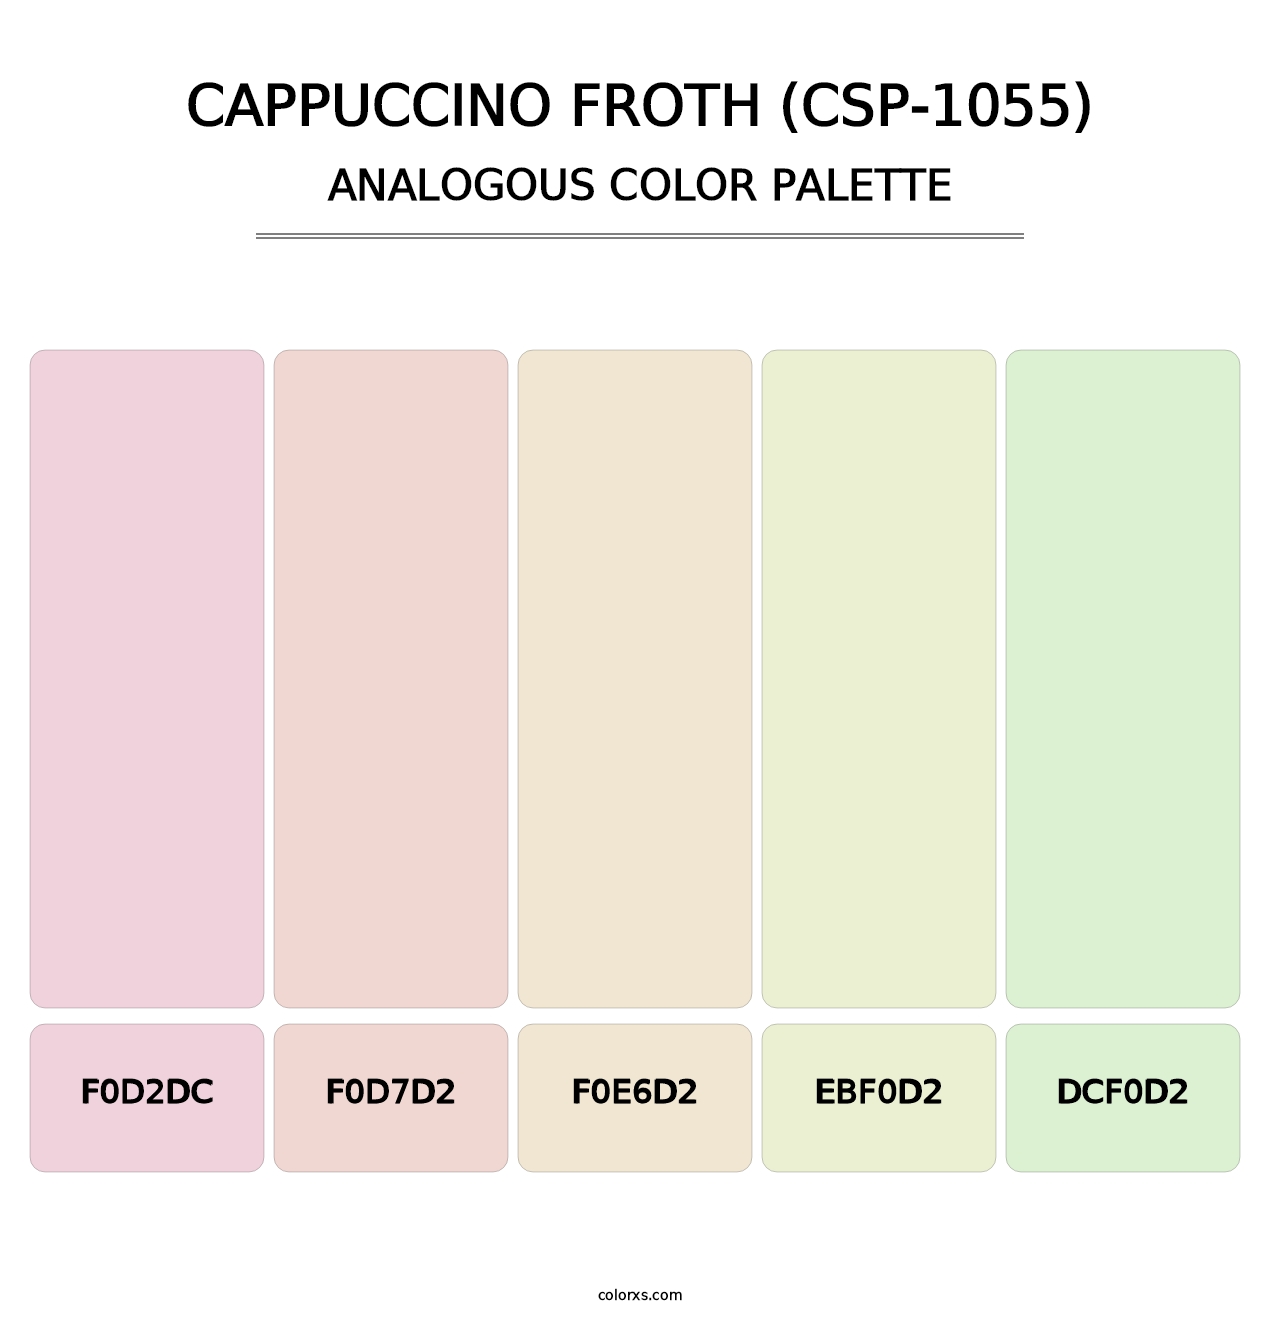 Cappuccino Froth (CSP-1055) - Analogous Color Palette